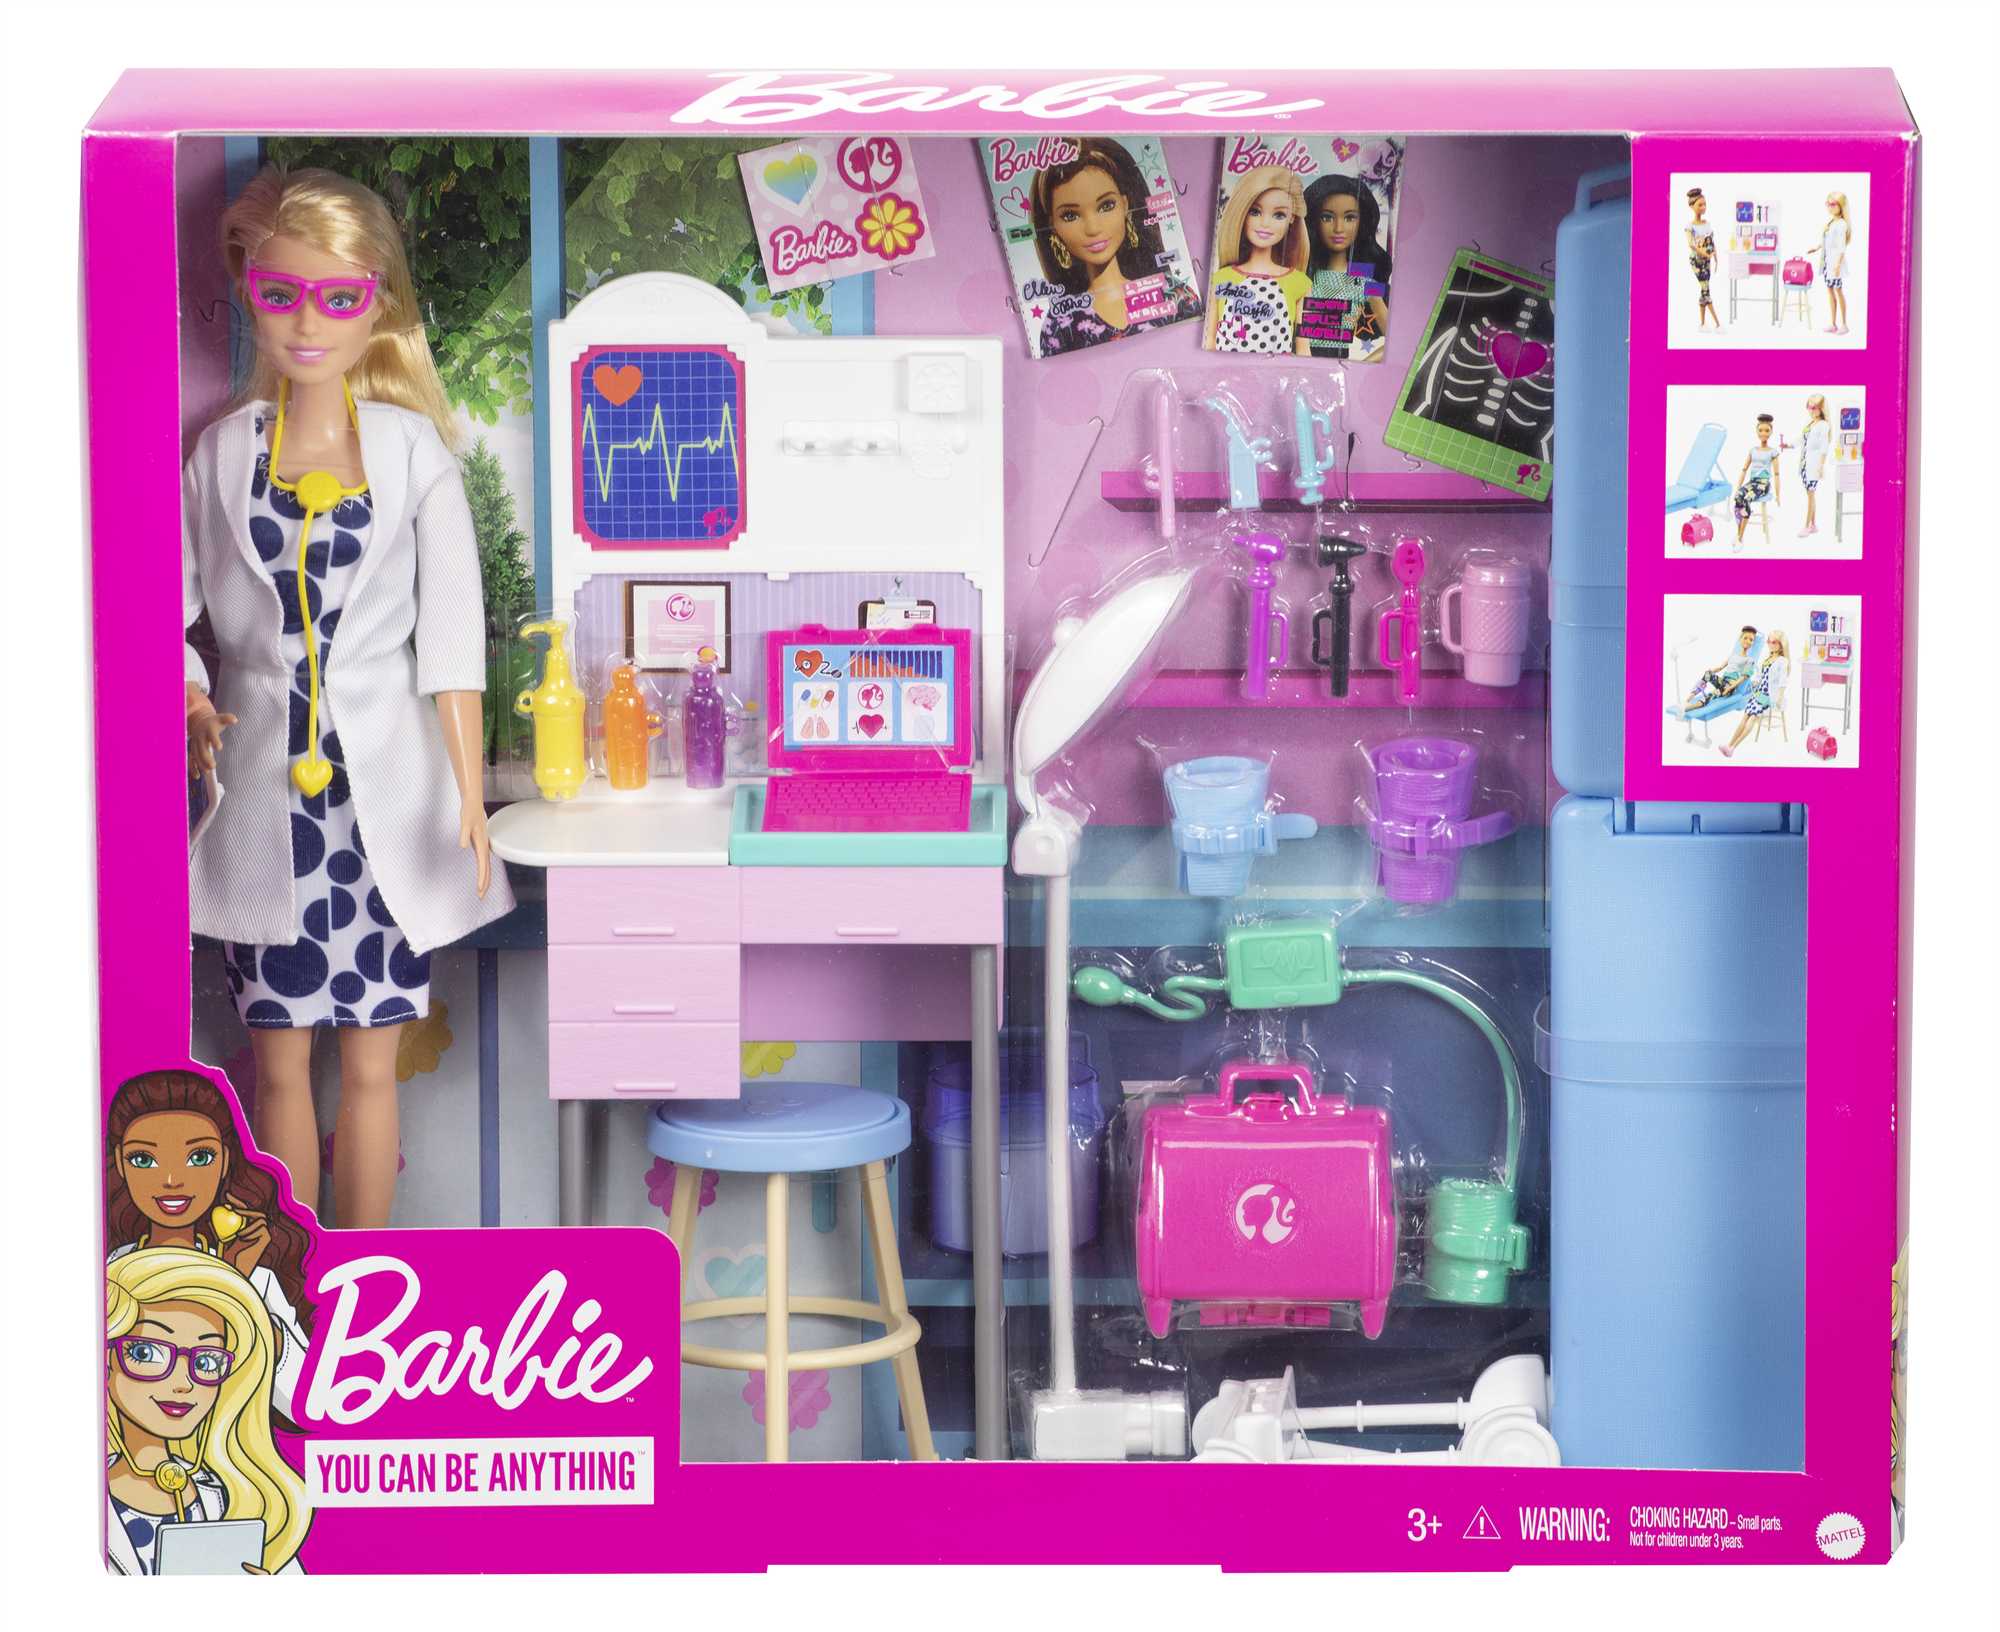 Barbie Doctor And Playset |